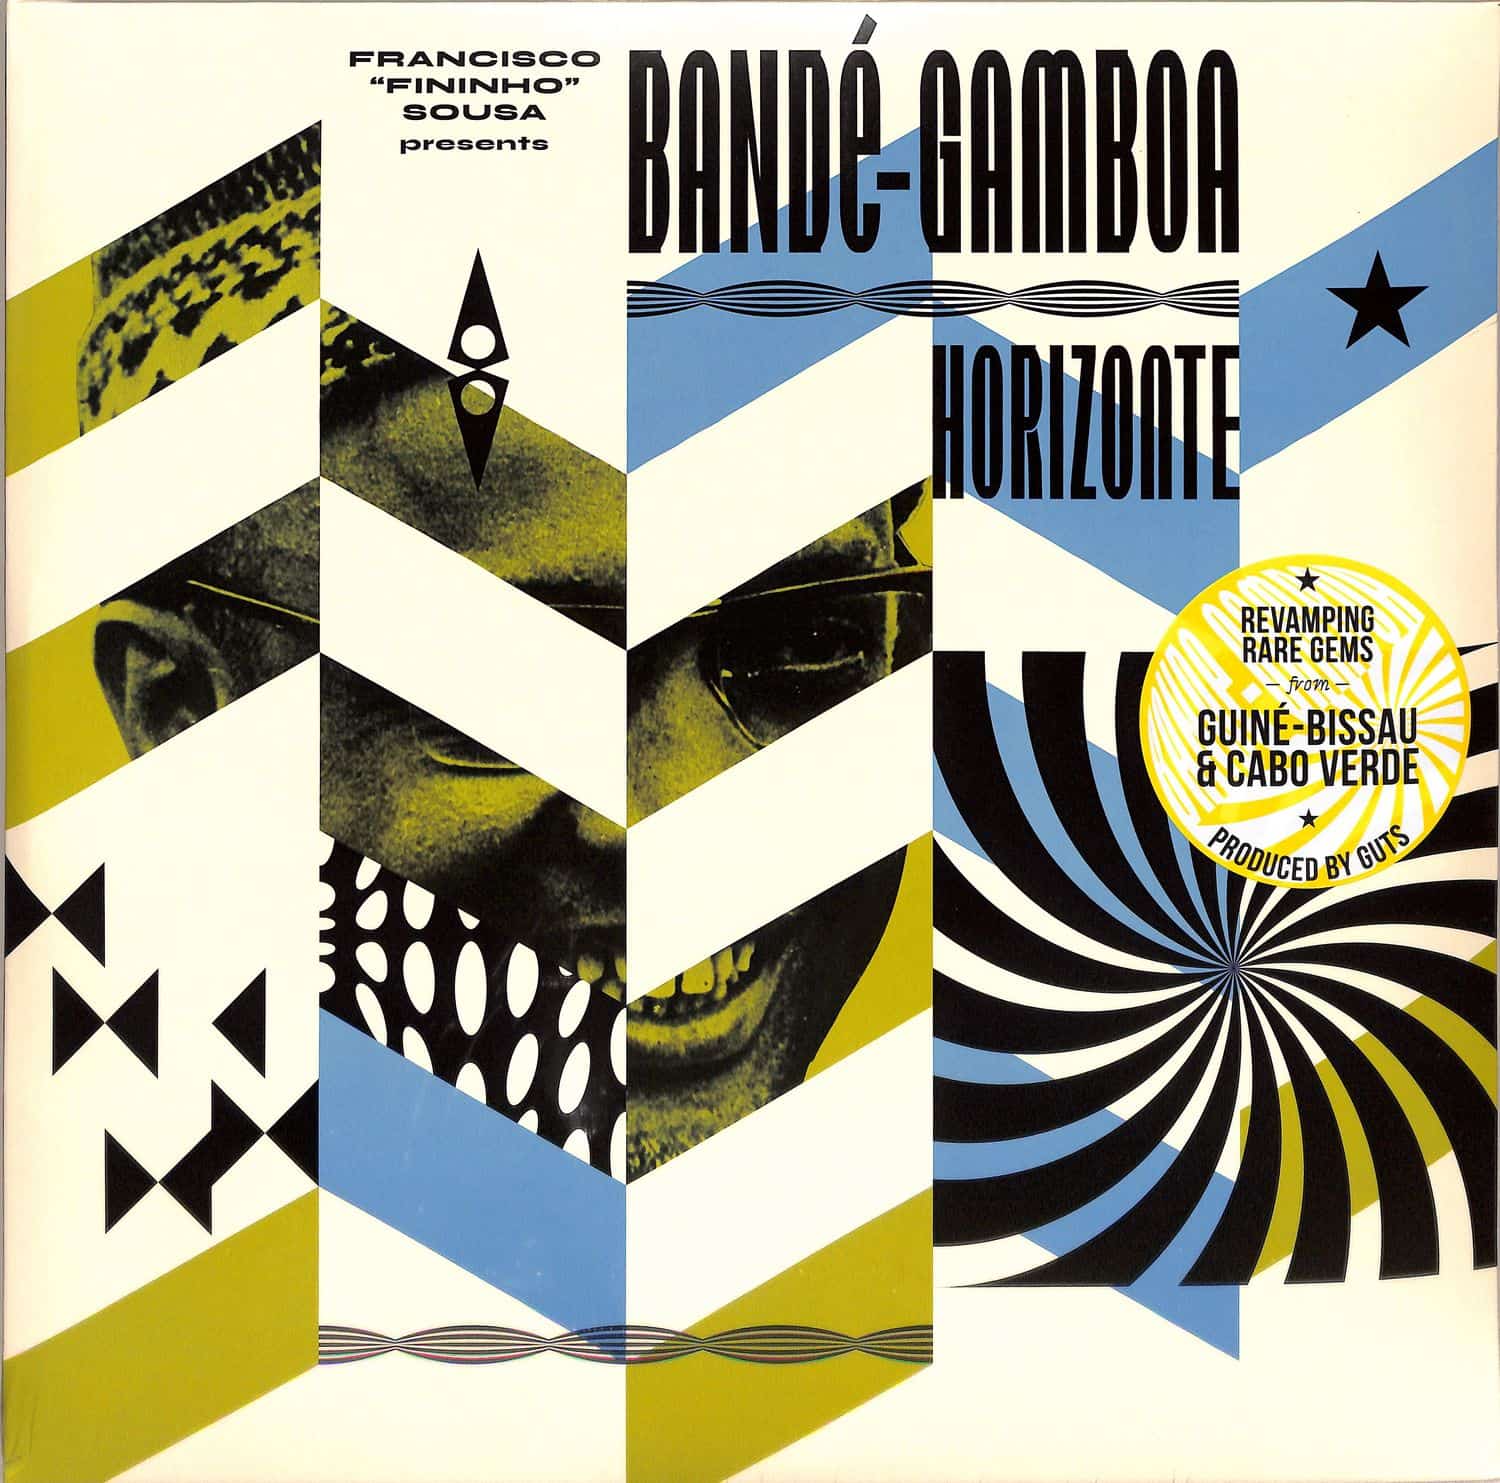 Bande Gamboa - REVAMPING RARE GEMS FROM CABO VERDE AND GUINE-BISSAU 